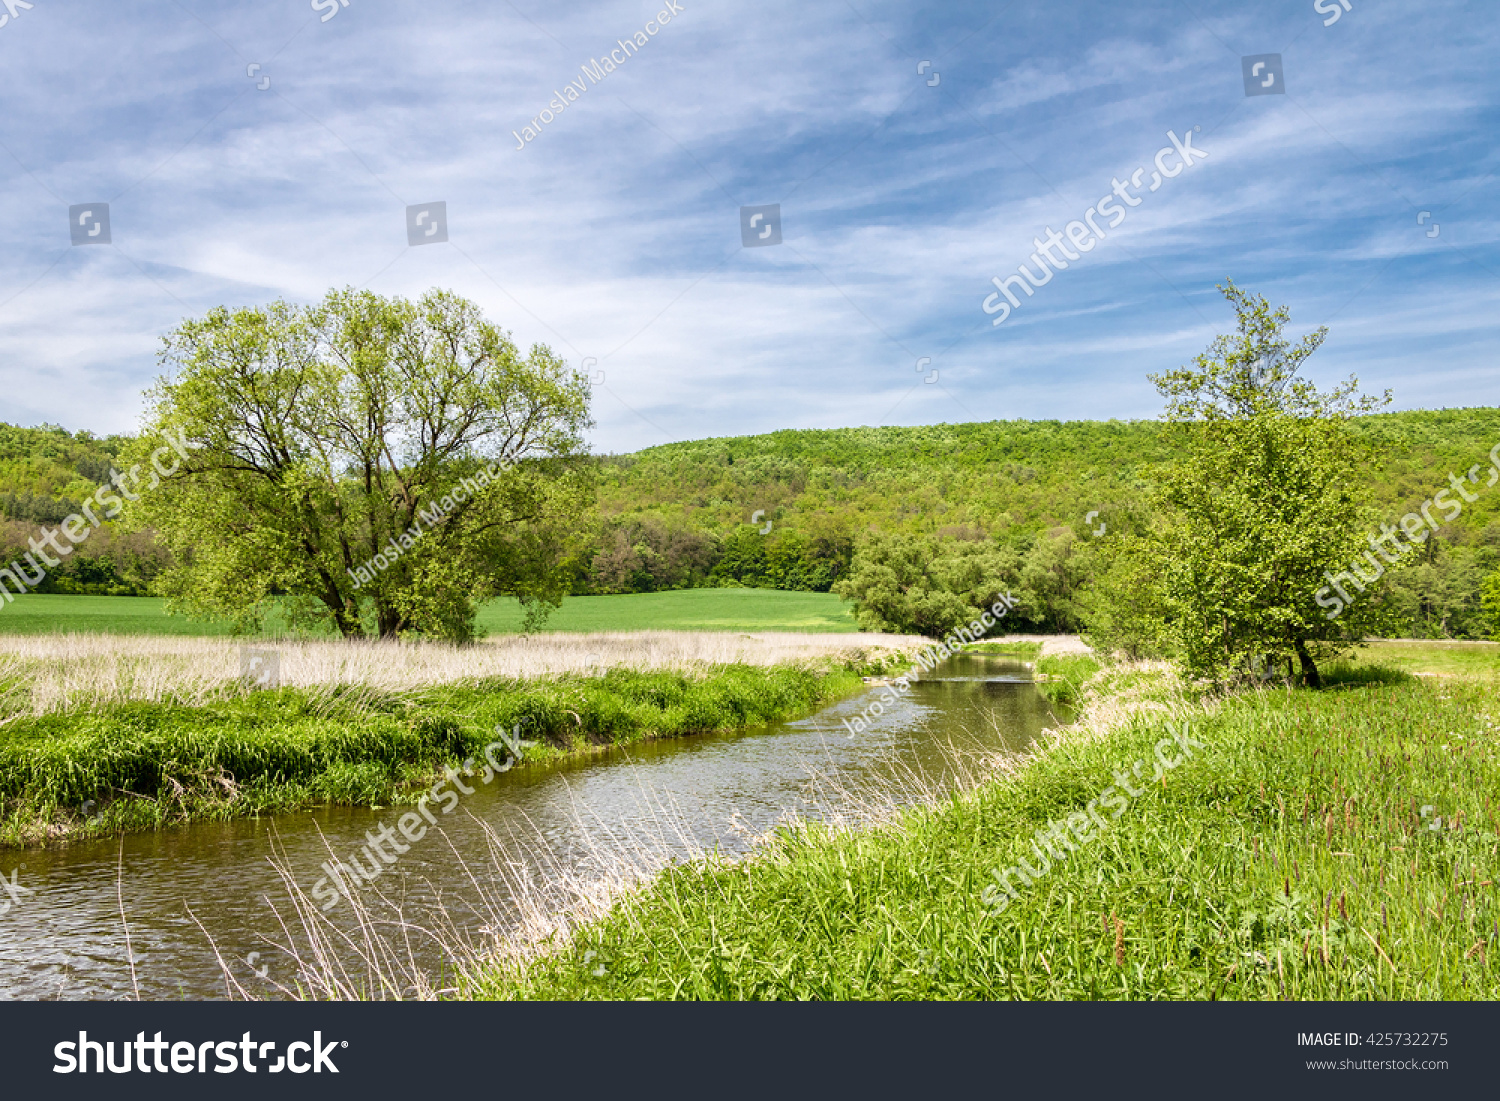 Spring landscape with green meadow, river, trees and blue sky with white clouds. Oslava river, Czech Republic, Europe. #425732275